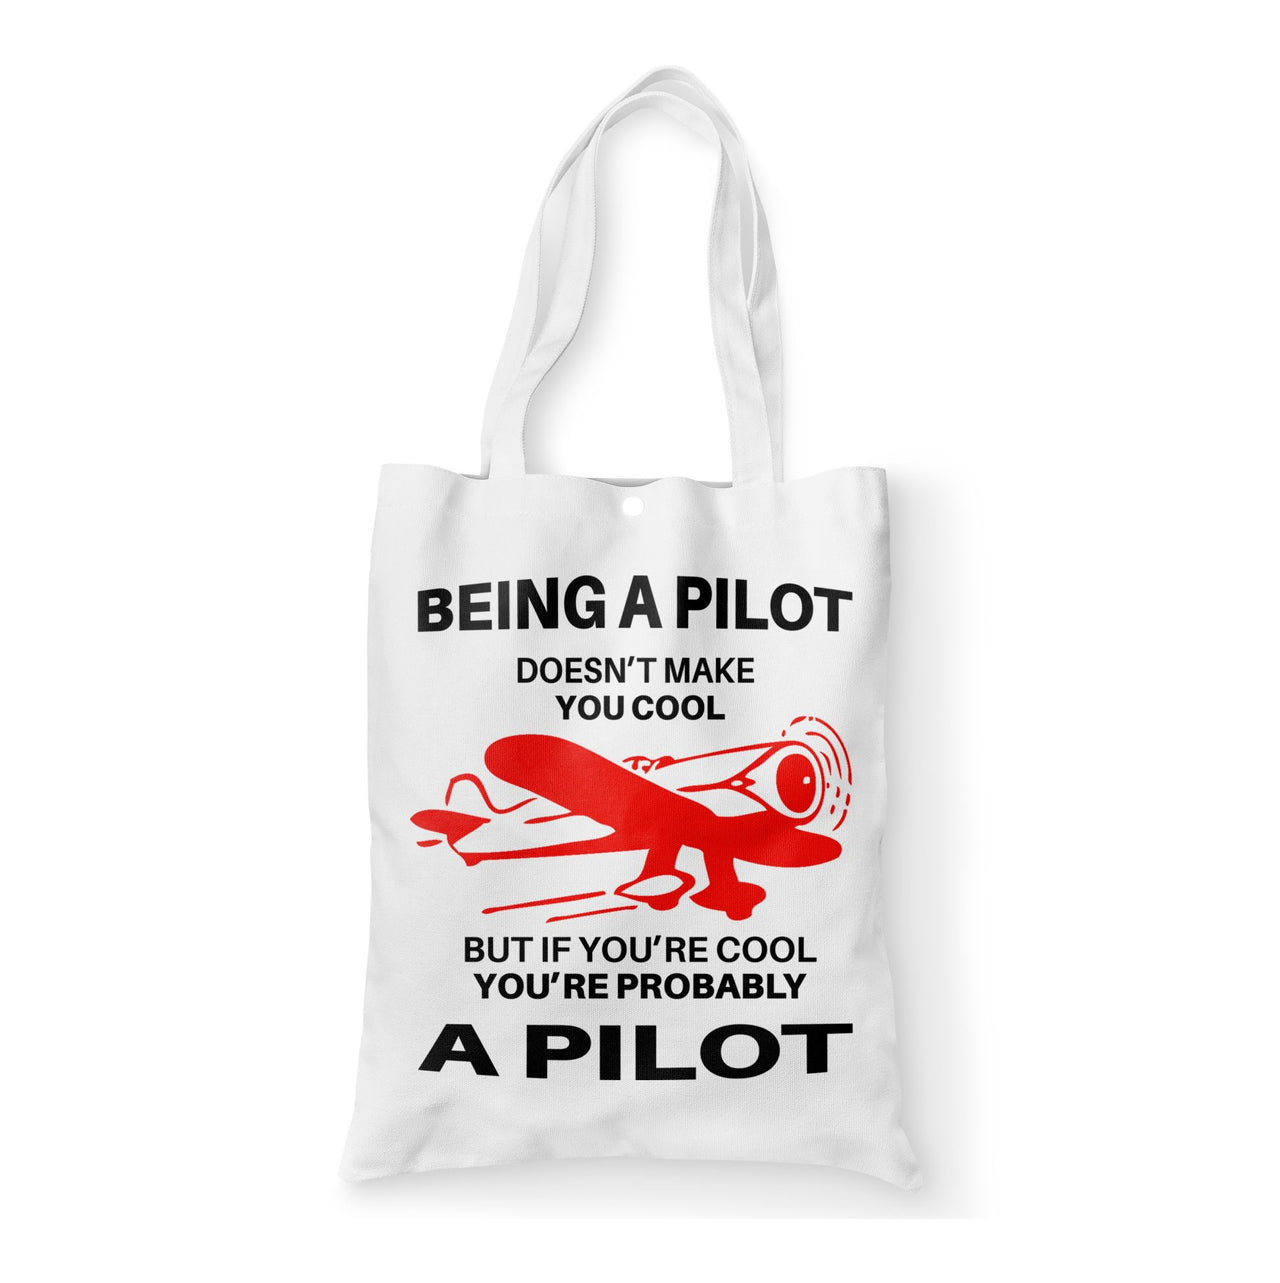 If You're Cool You're Probably a Pilot Designed Tote Bags